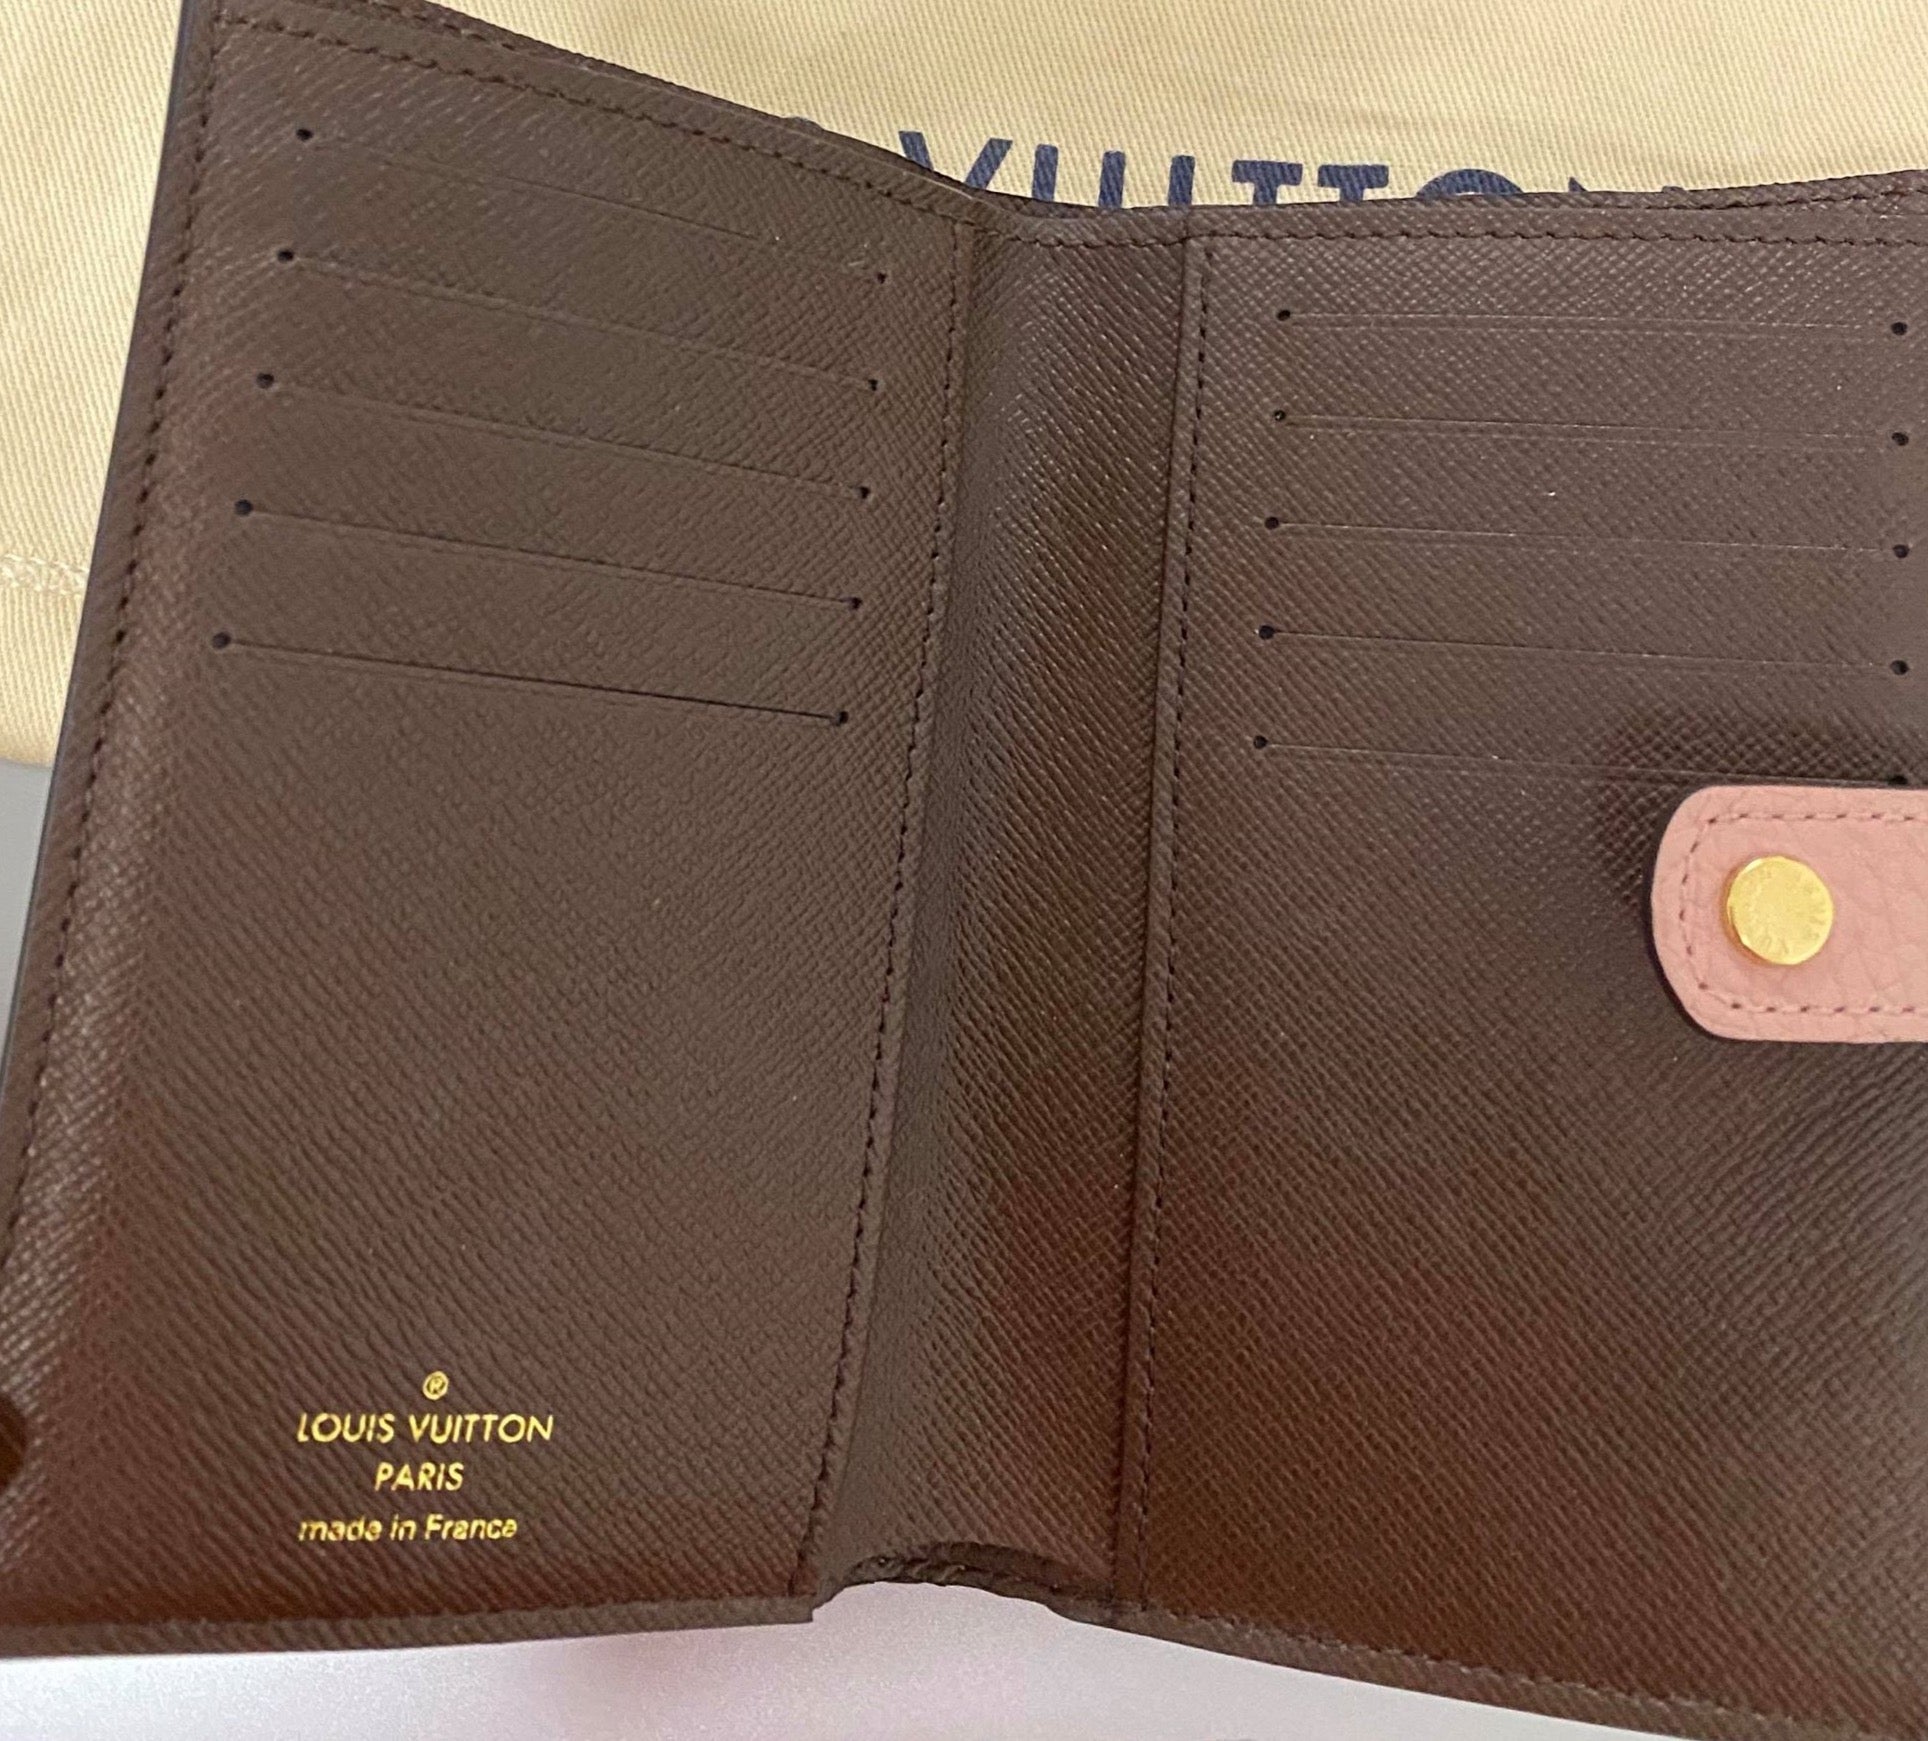 Pin by Vip on Wallet  Louis vuitton, Vuitton, Wallet